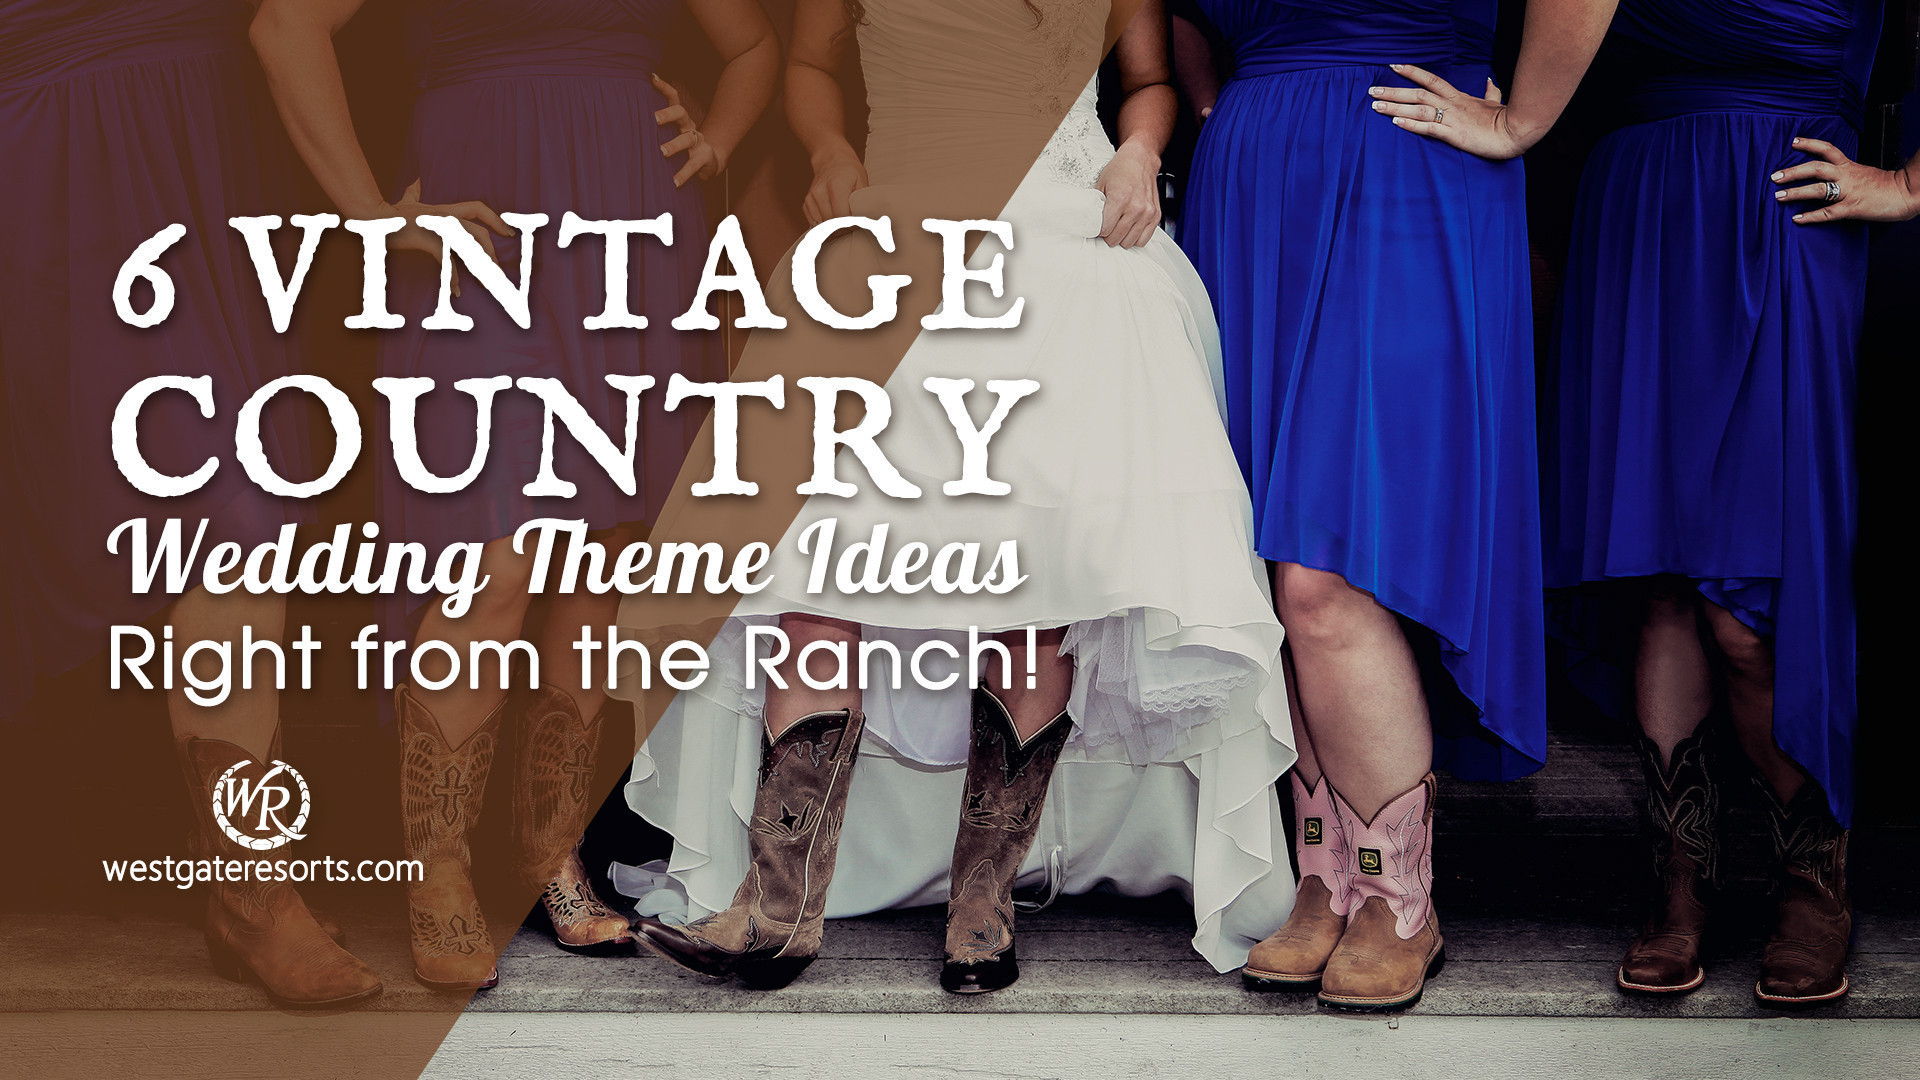 Bride Guide: 6 Vintage Country Wedding Theme Ideas Right From the Ranch! | Westgate River Ranch